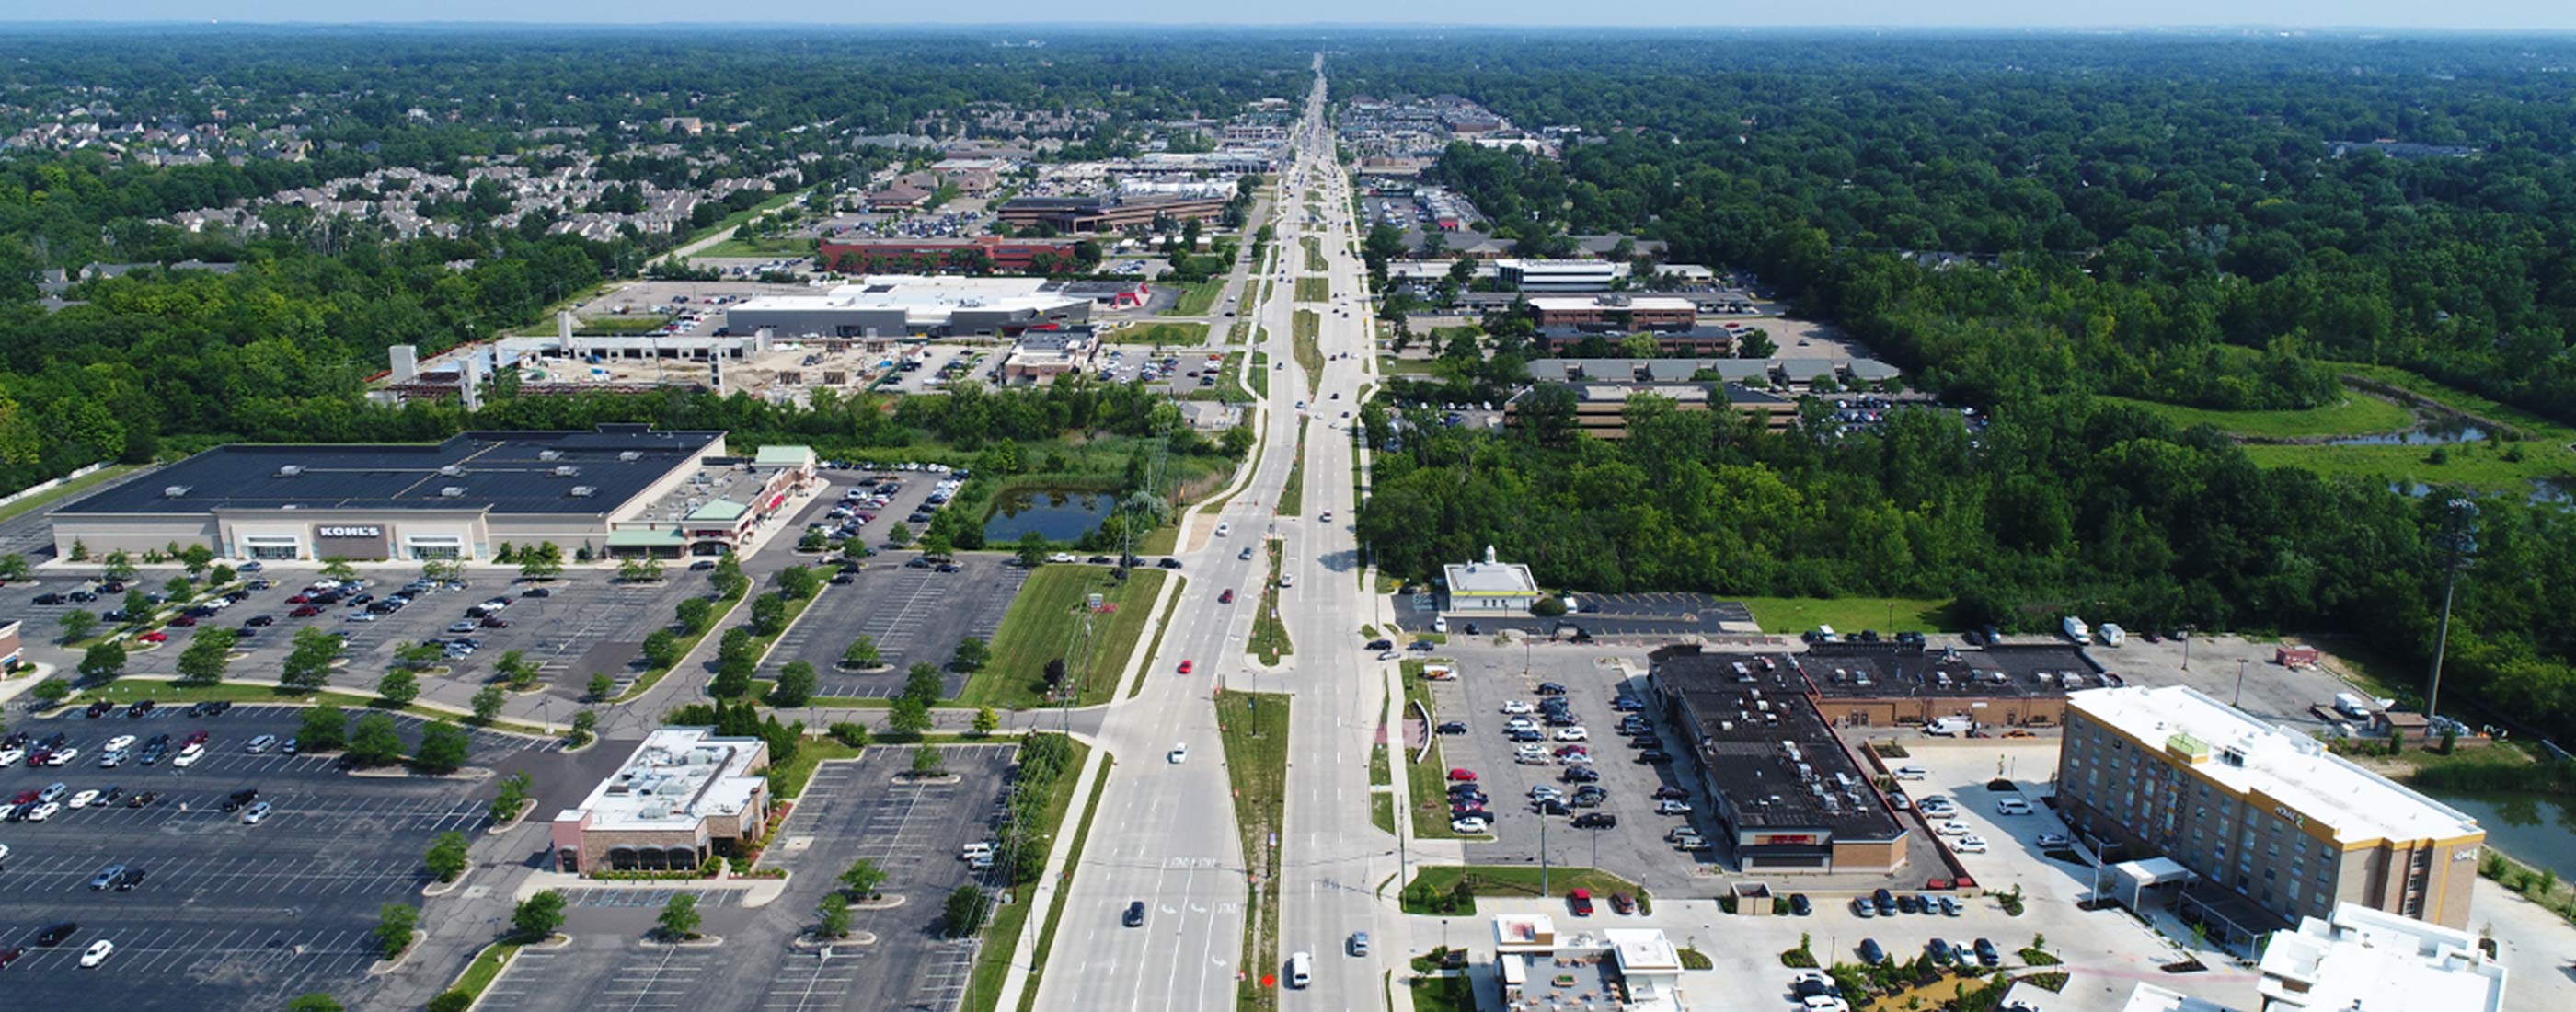 An overhead view of the 4-land boulevard on Orchard Lake Road in Farmington Hills, Michigan.